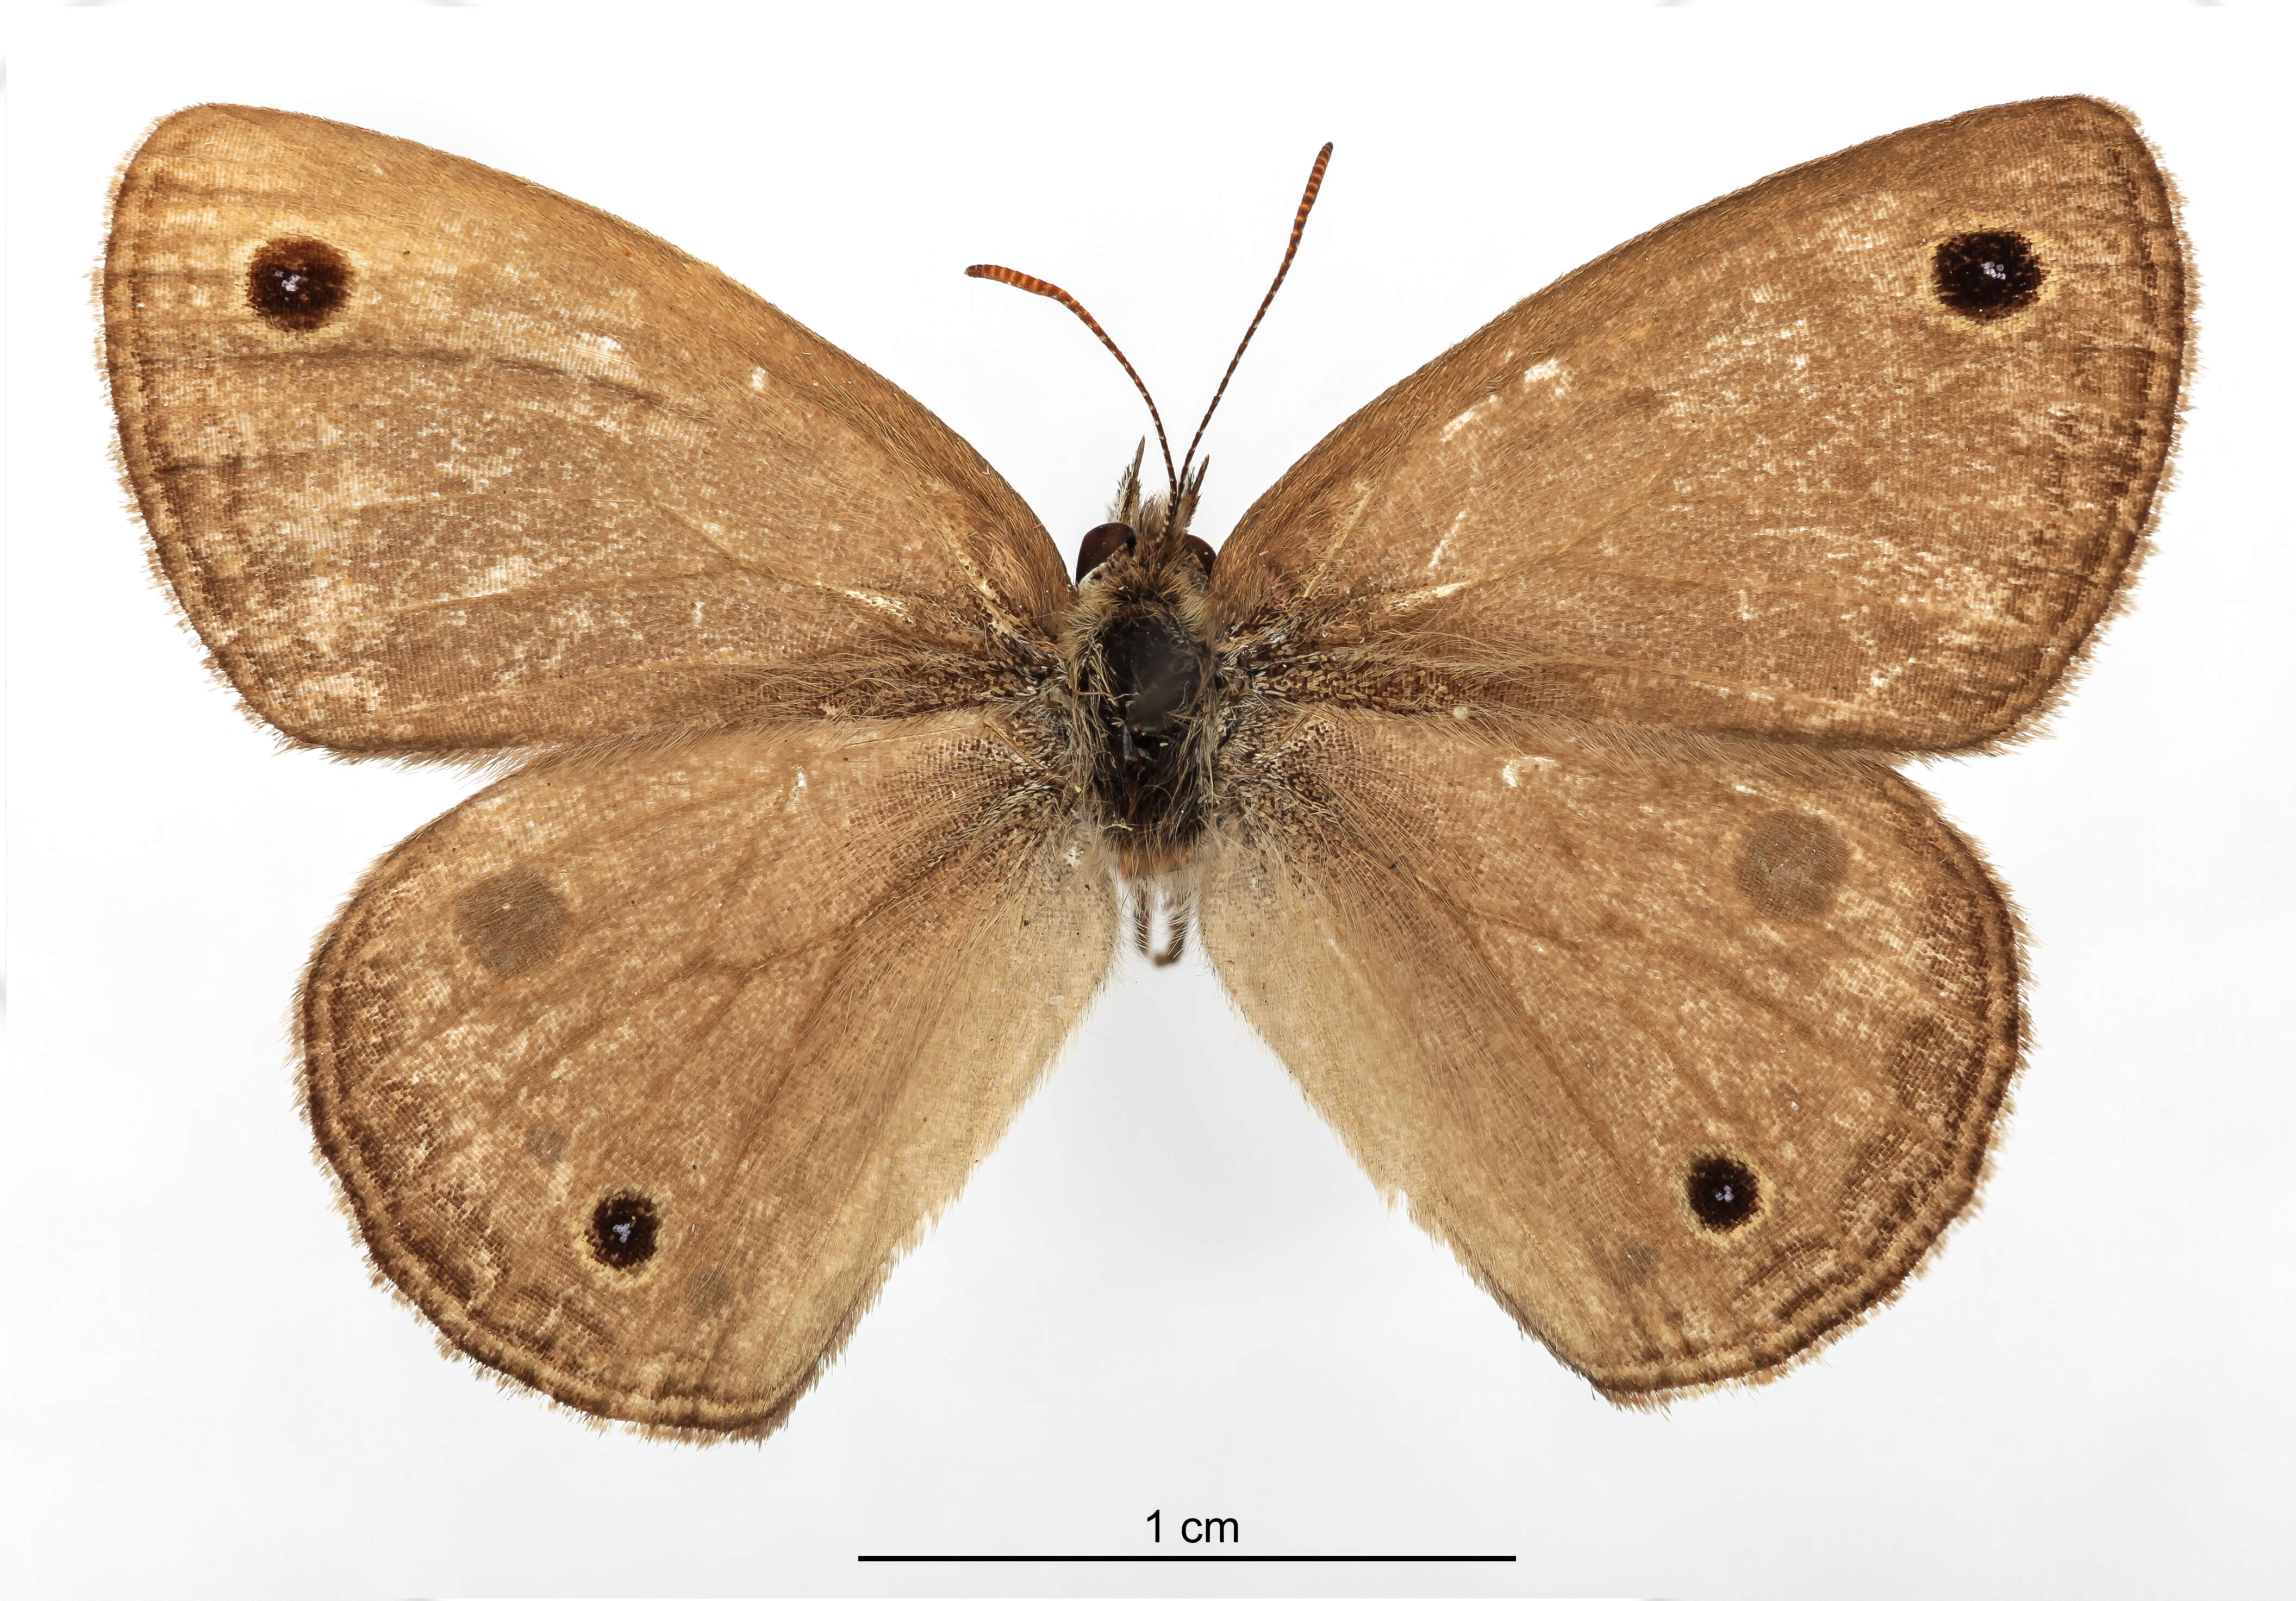 Image of brush-footed butterflies